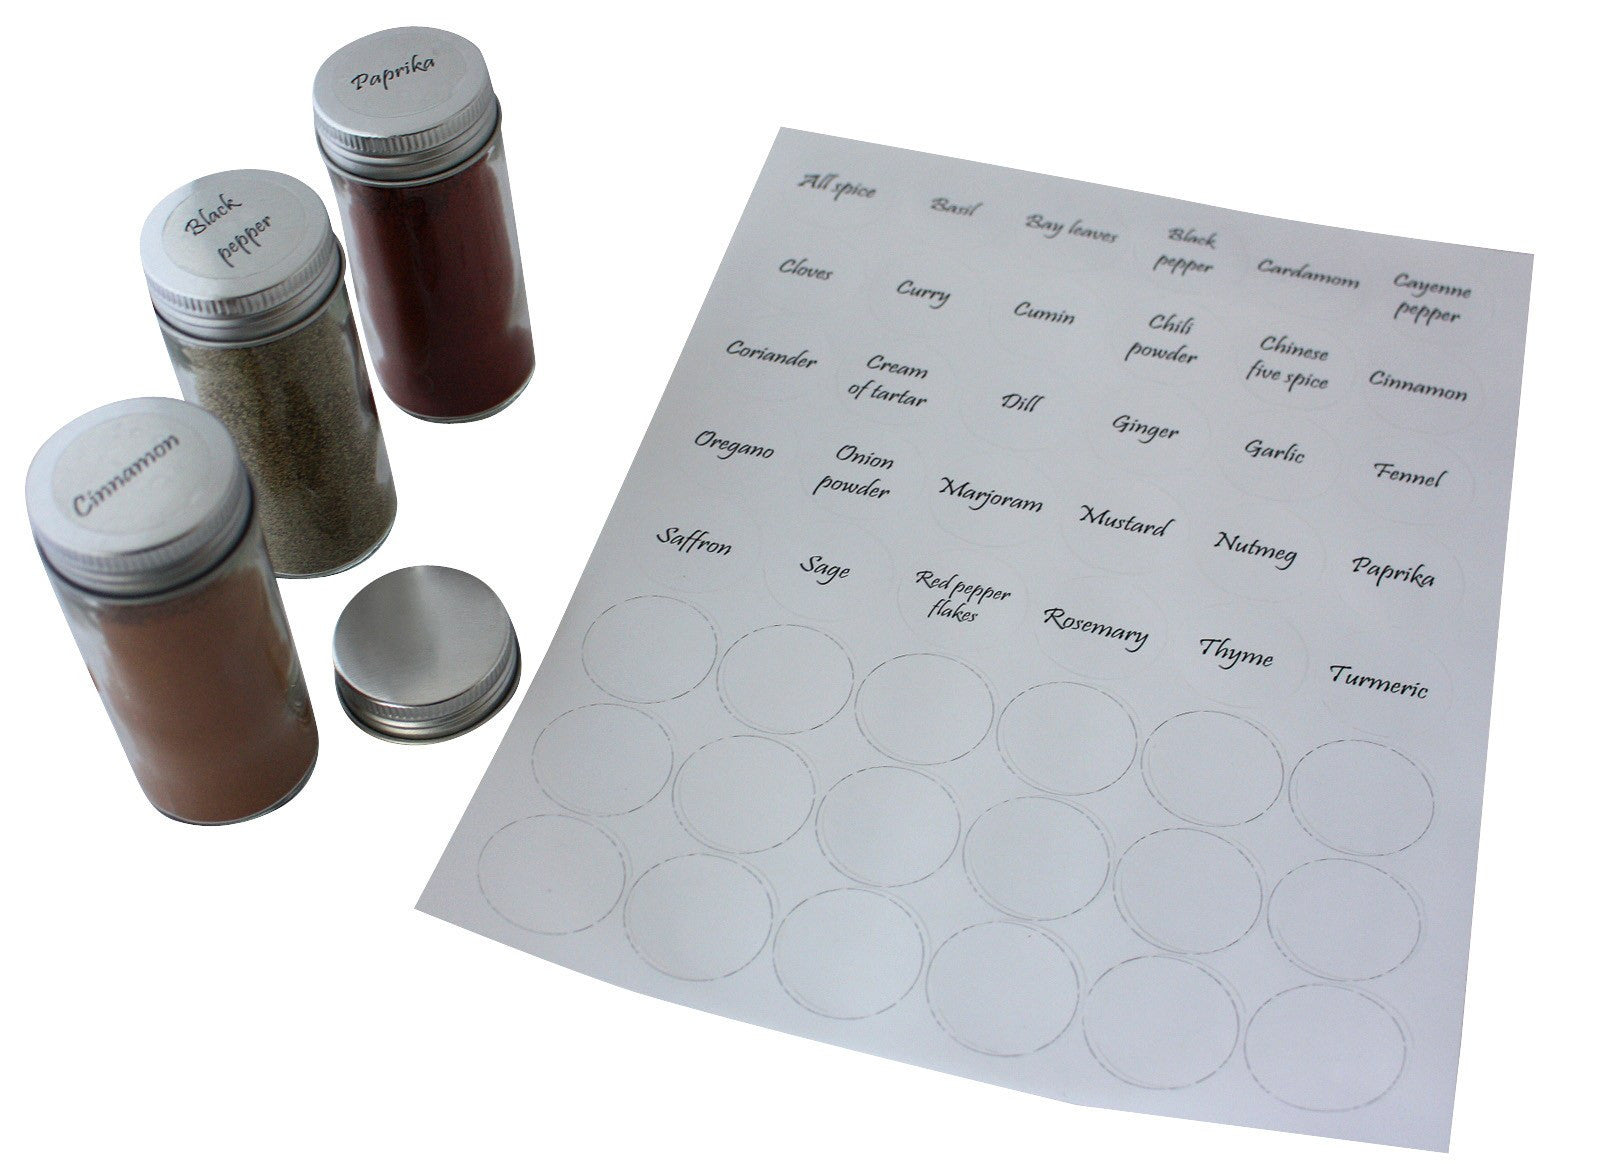 https://royalgreenmarket.com/cdn/shop/products/48_blank_spice_spices_white_semi_gloss_labels_stickers.JPG?v=1499840514